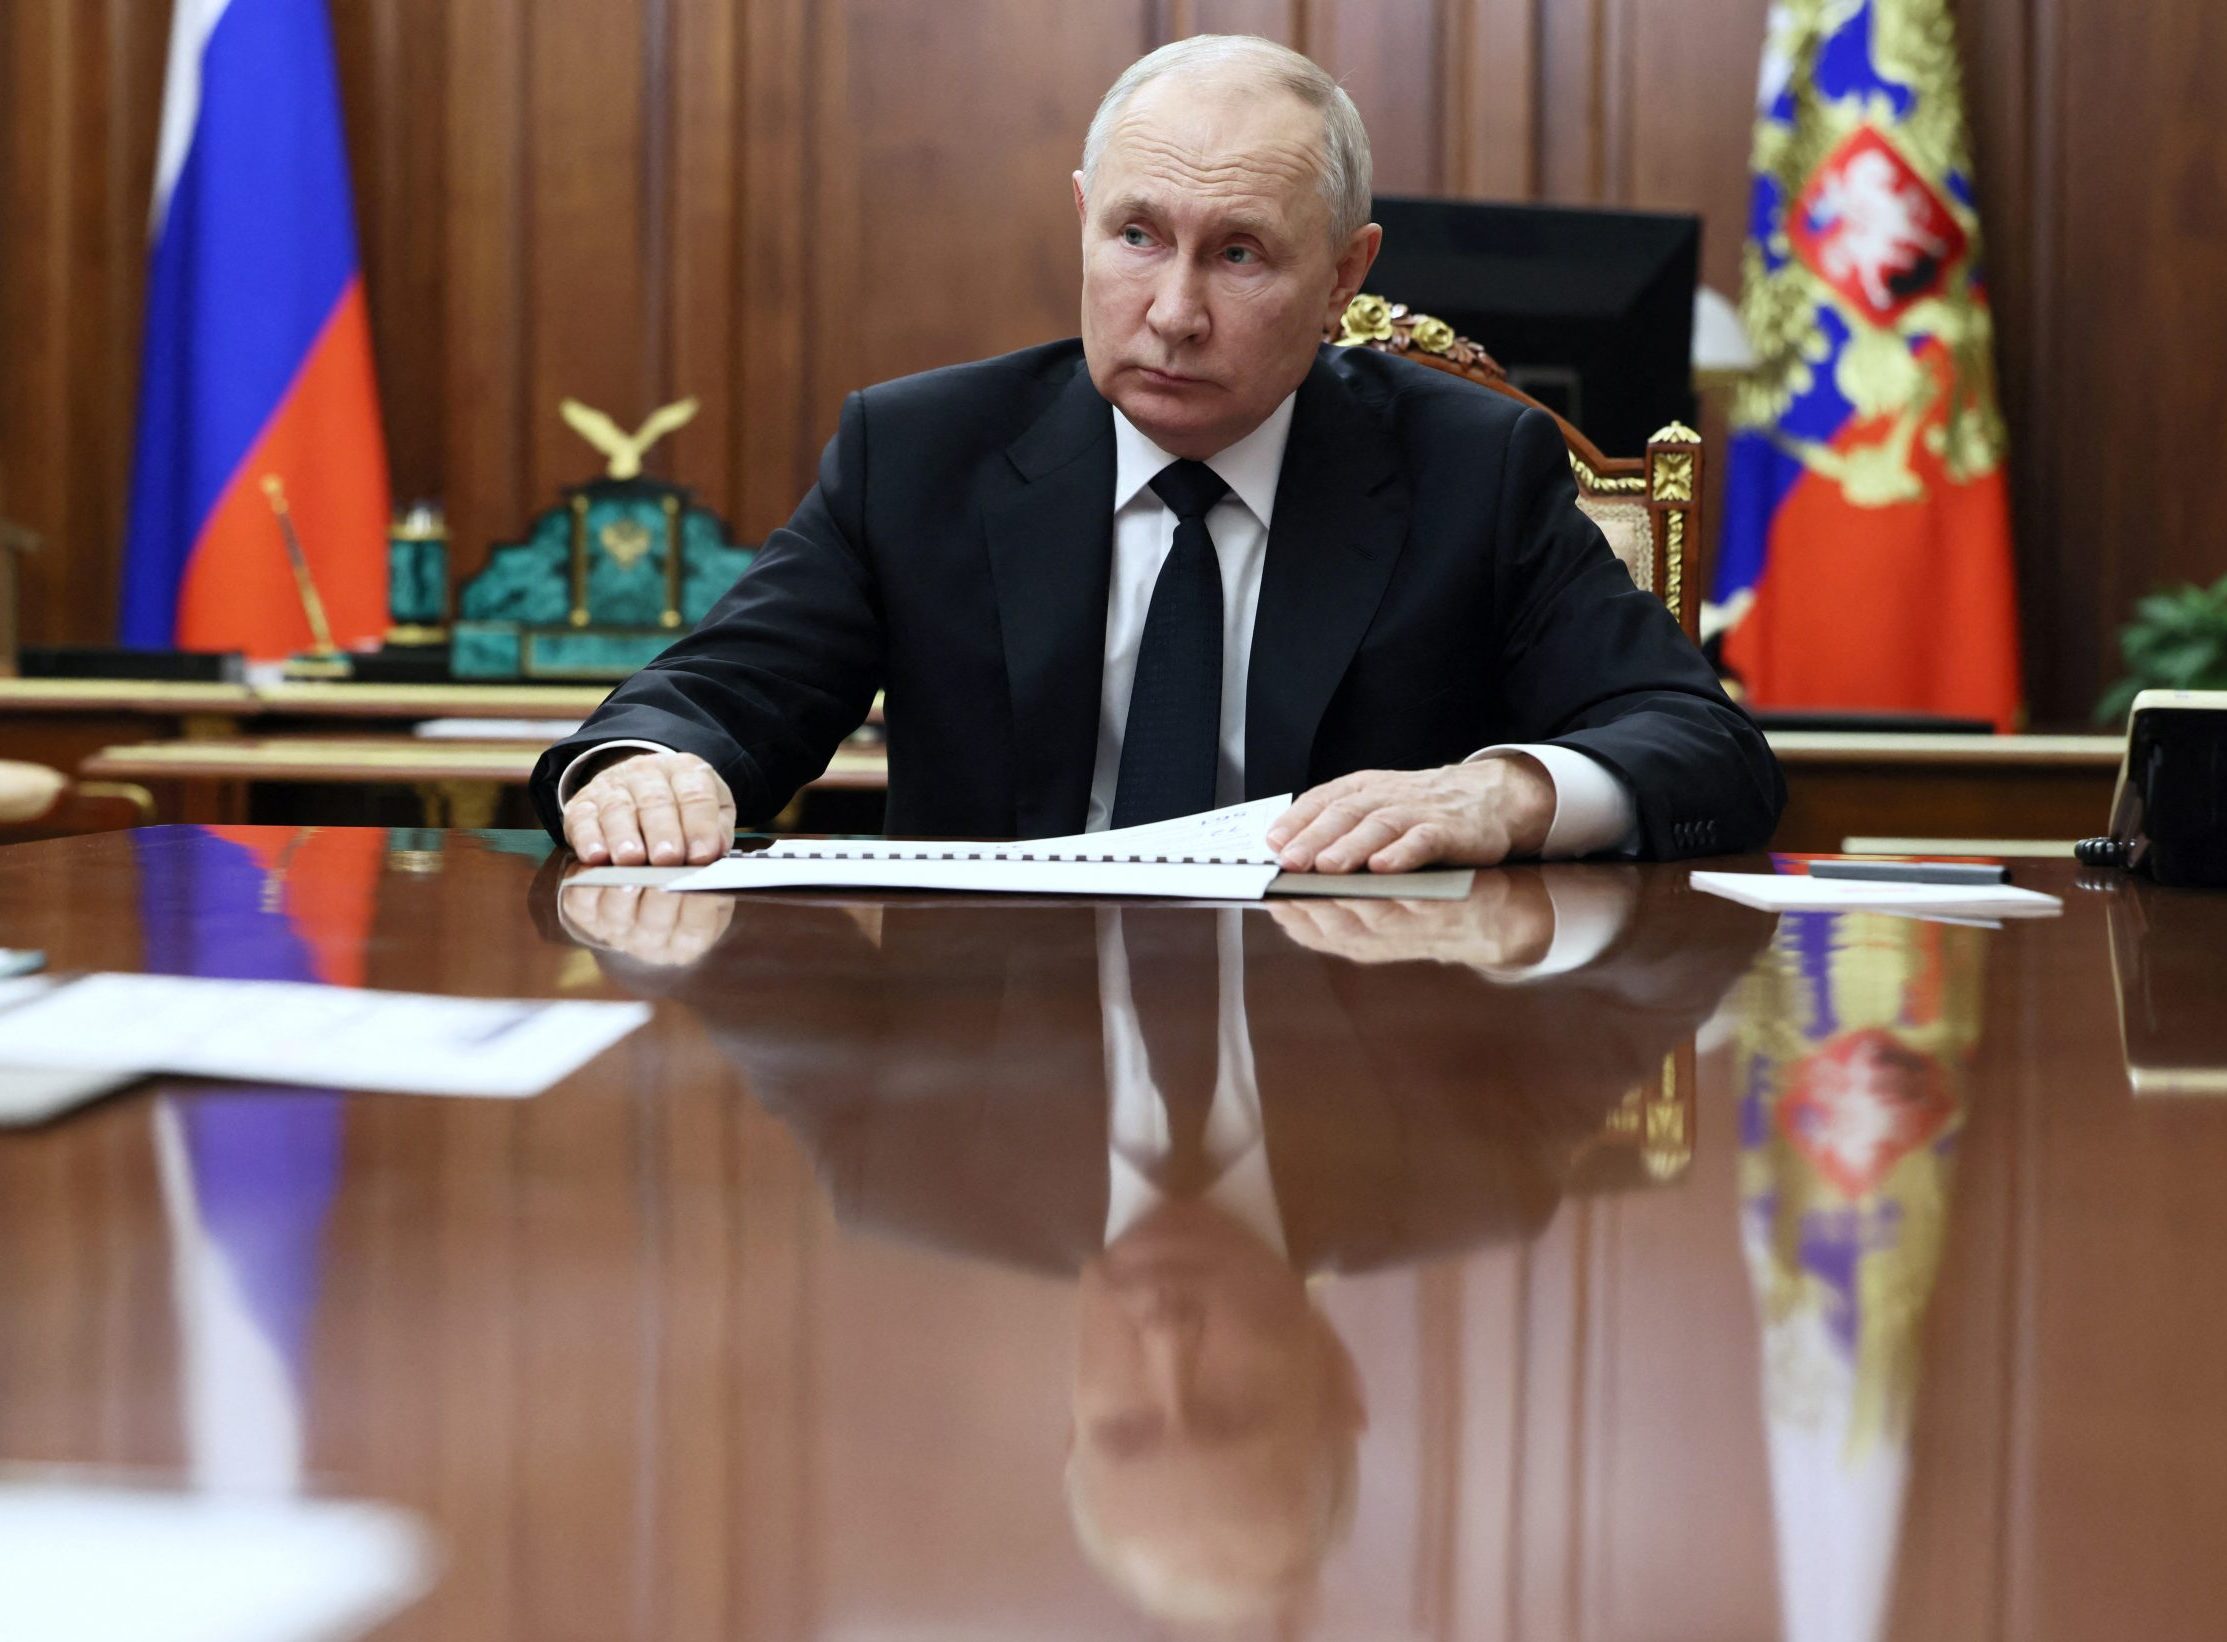 Peace is impossible while Vladimir Putin denies Ukraine's right to exist - Atlantic Council